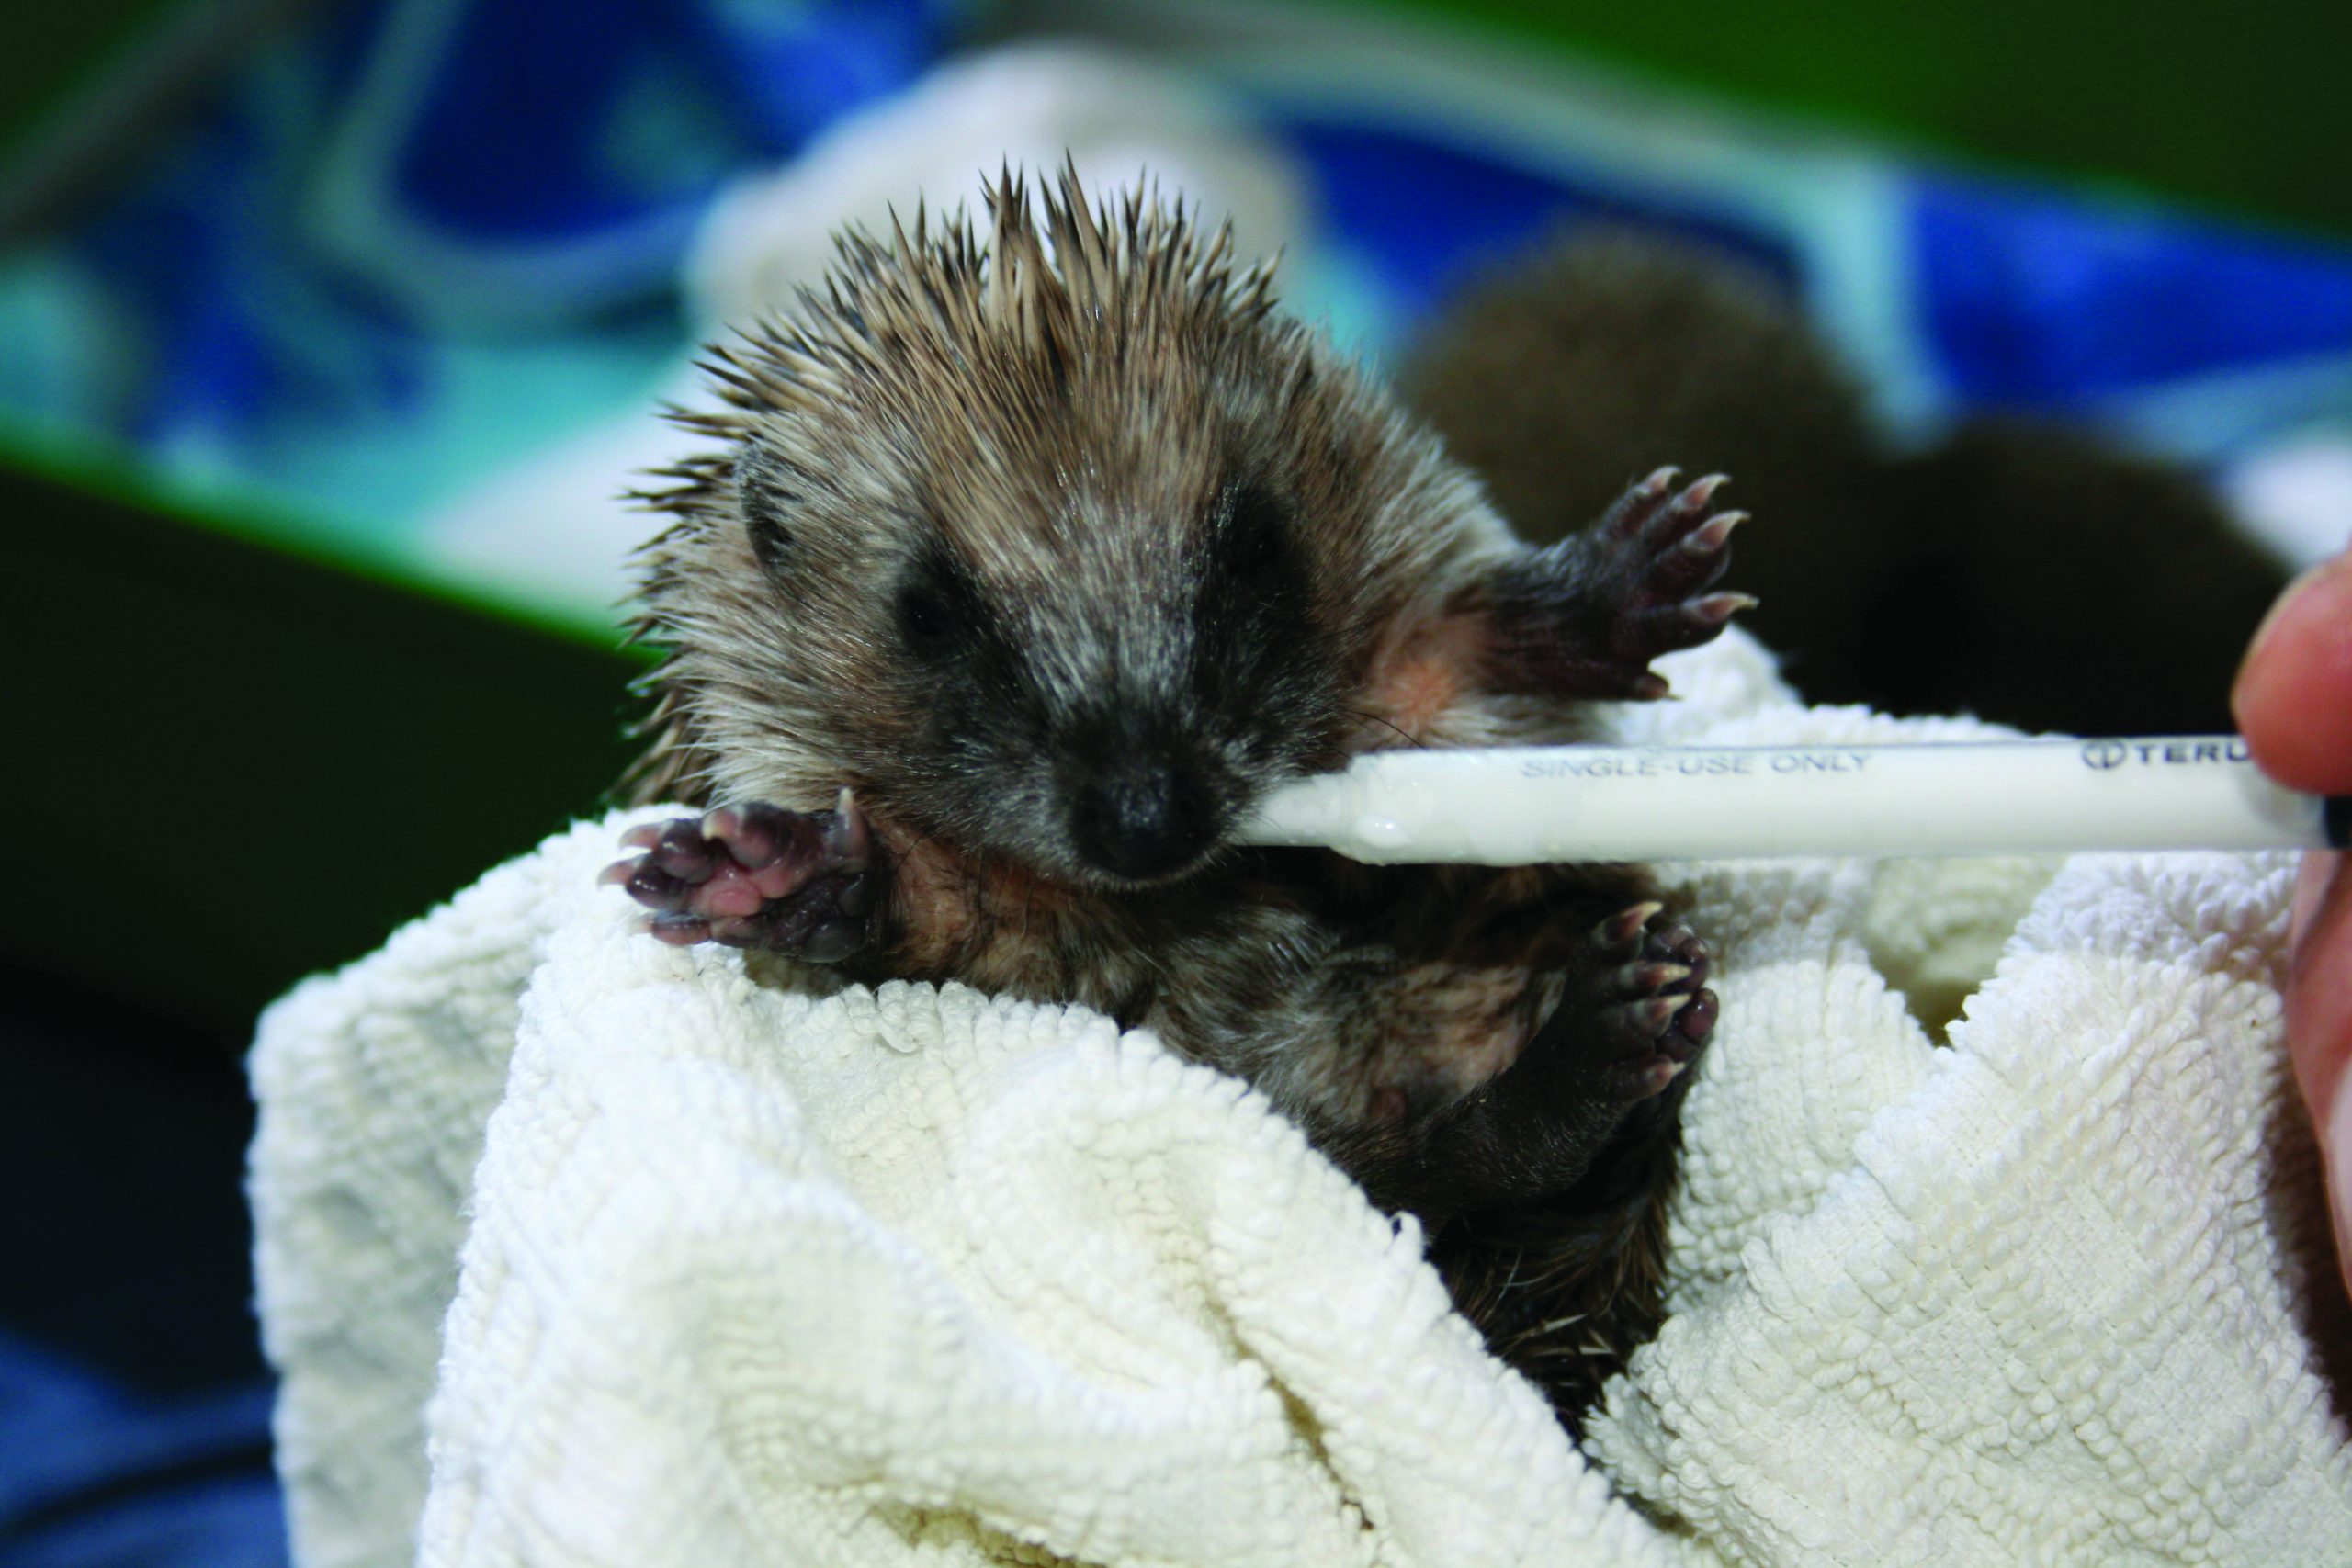 A young hedgehog wrapped up in a towel, and being fed.